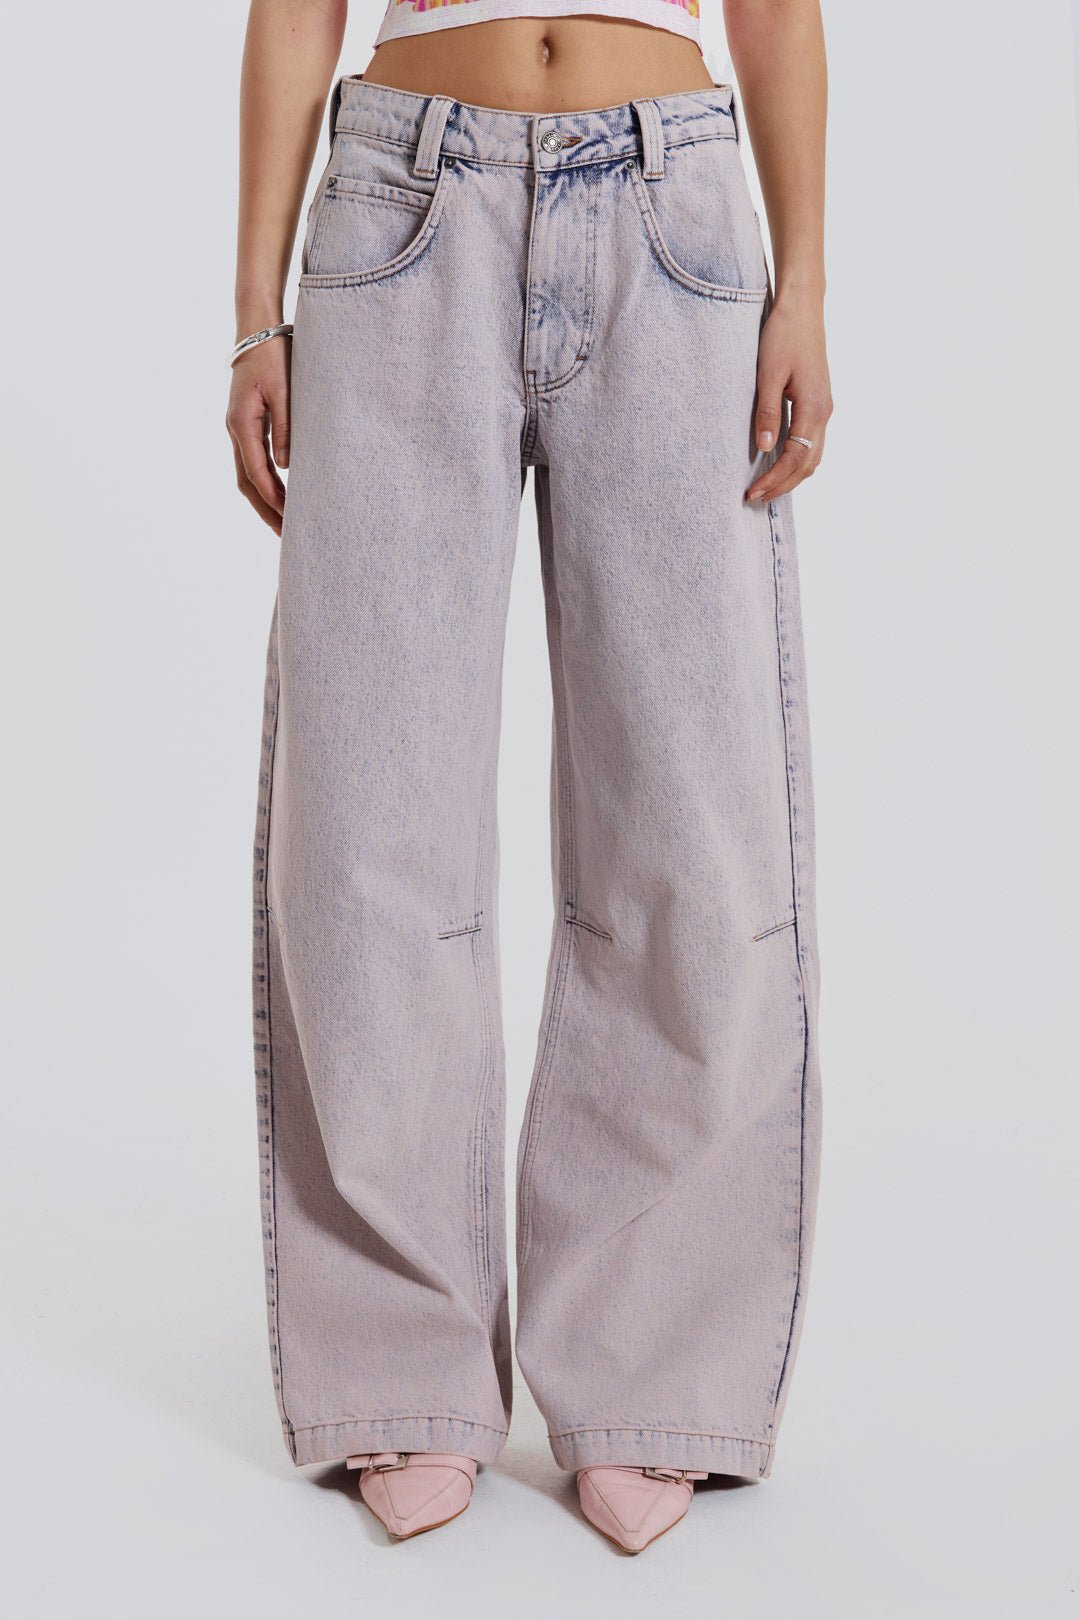 Pink Acid Wash Colossus Baggy Jeans